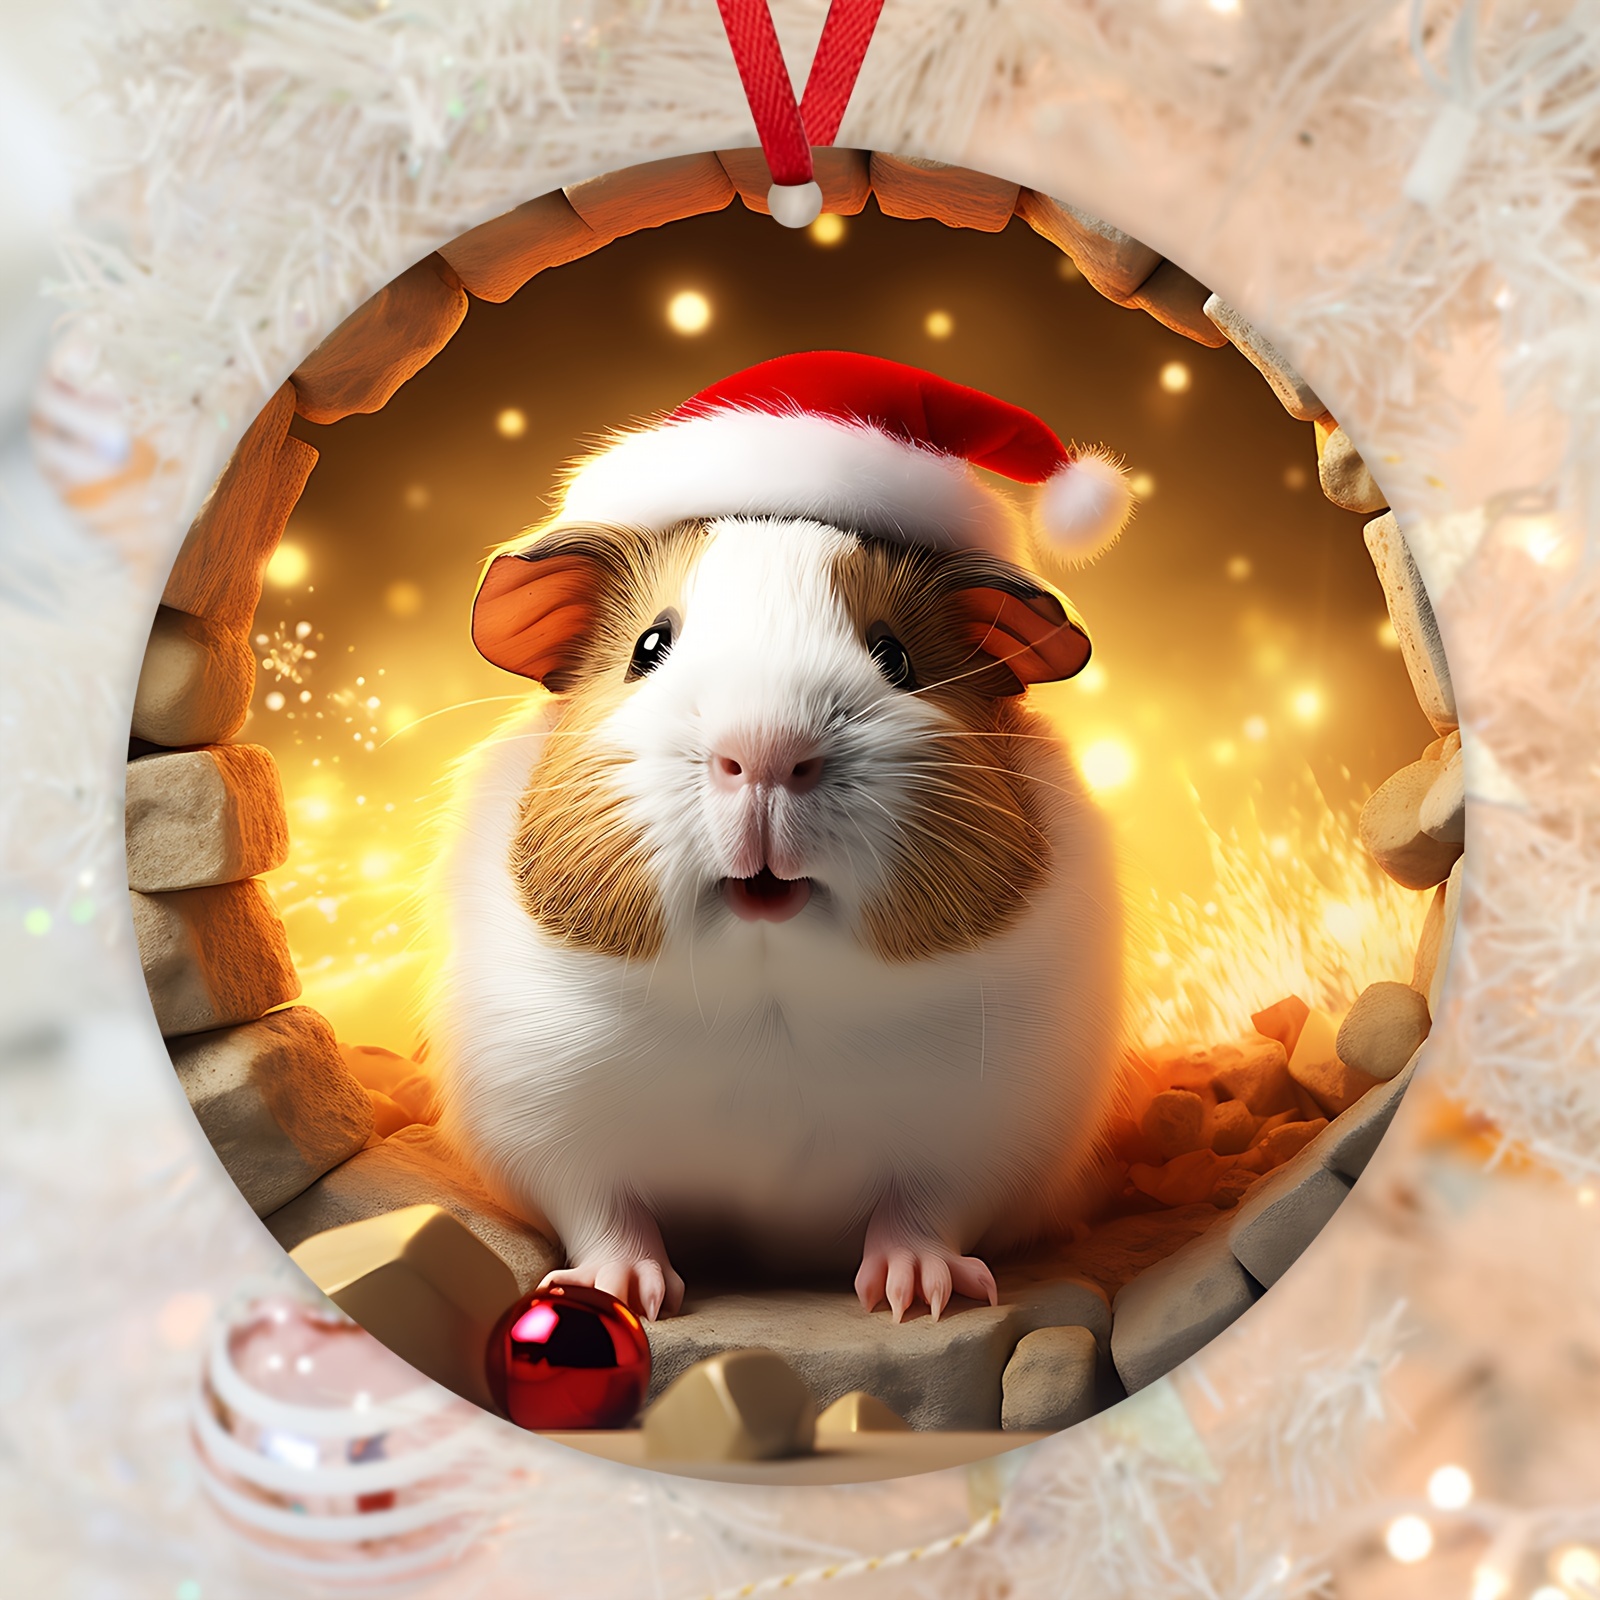  9PCS Christmas Guinea Pig Felt Ornaments Santa Hamster Hanging  Decorations for Christmas Supplies Cute Xmas Ornaments Party Supplies Wall  Decor Gifts for Kids Toddlers : Toys & Games